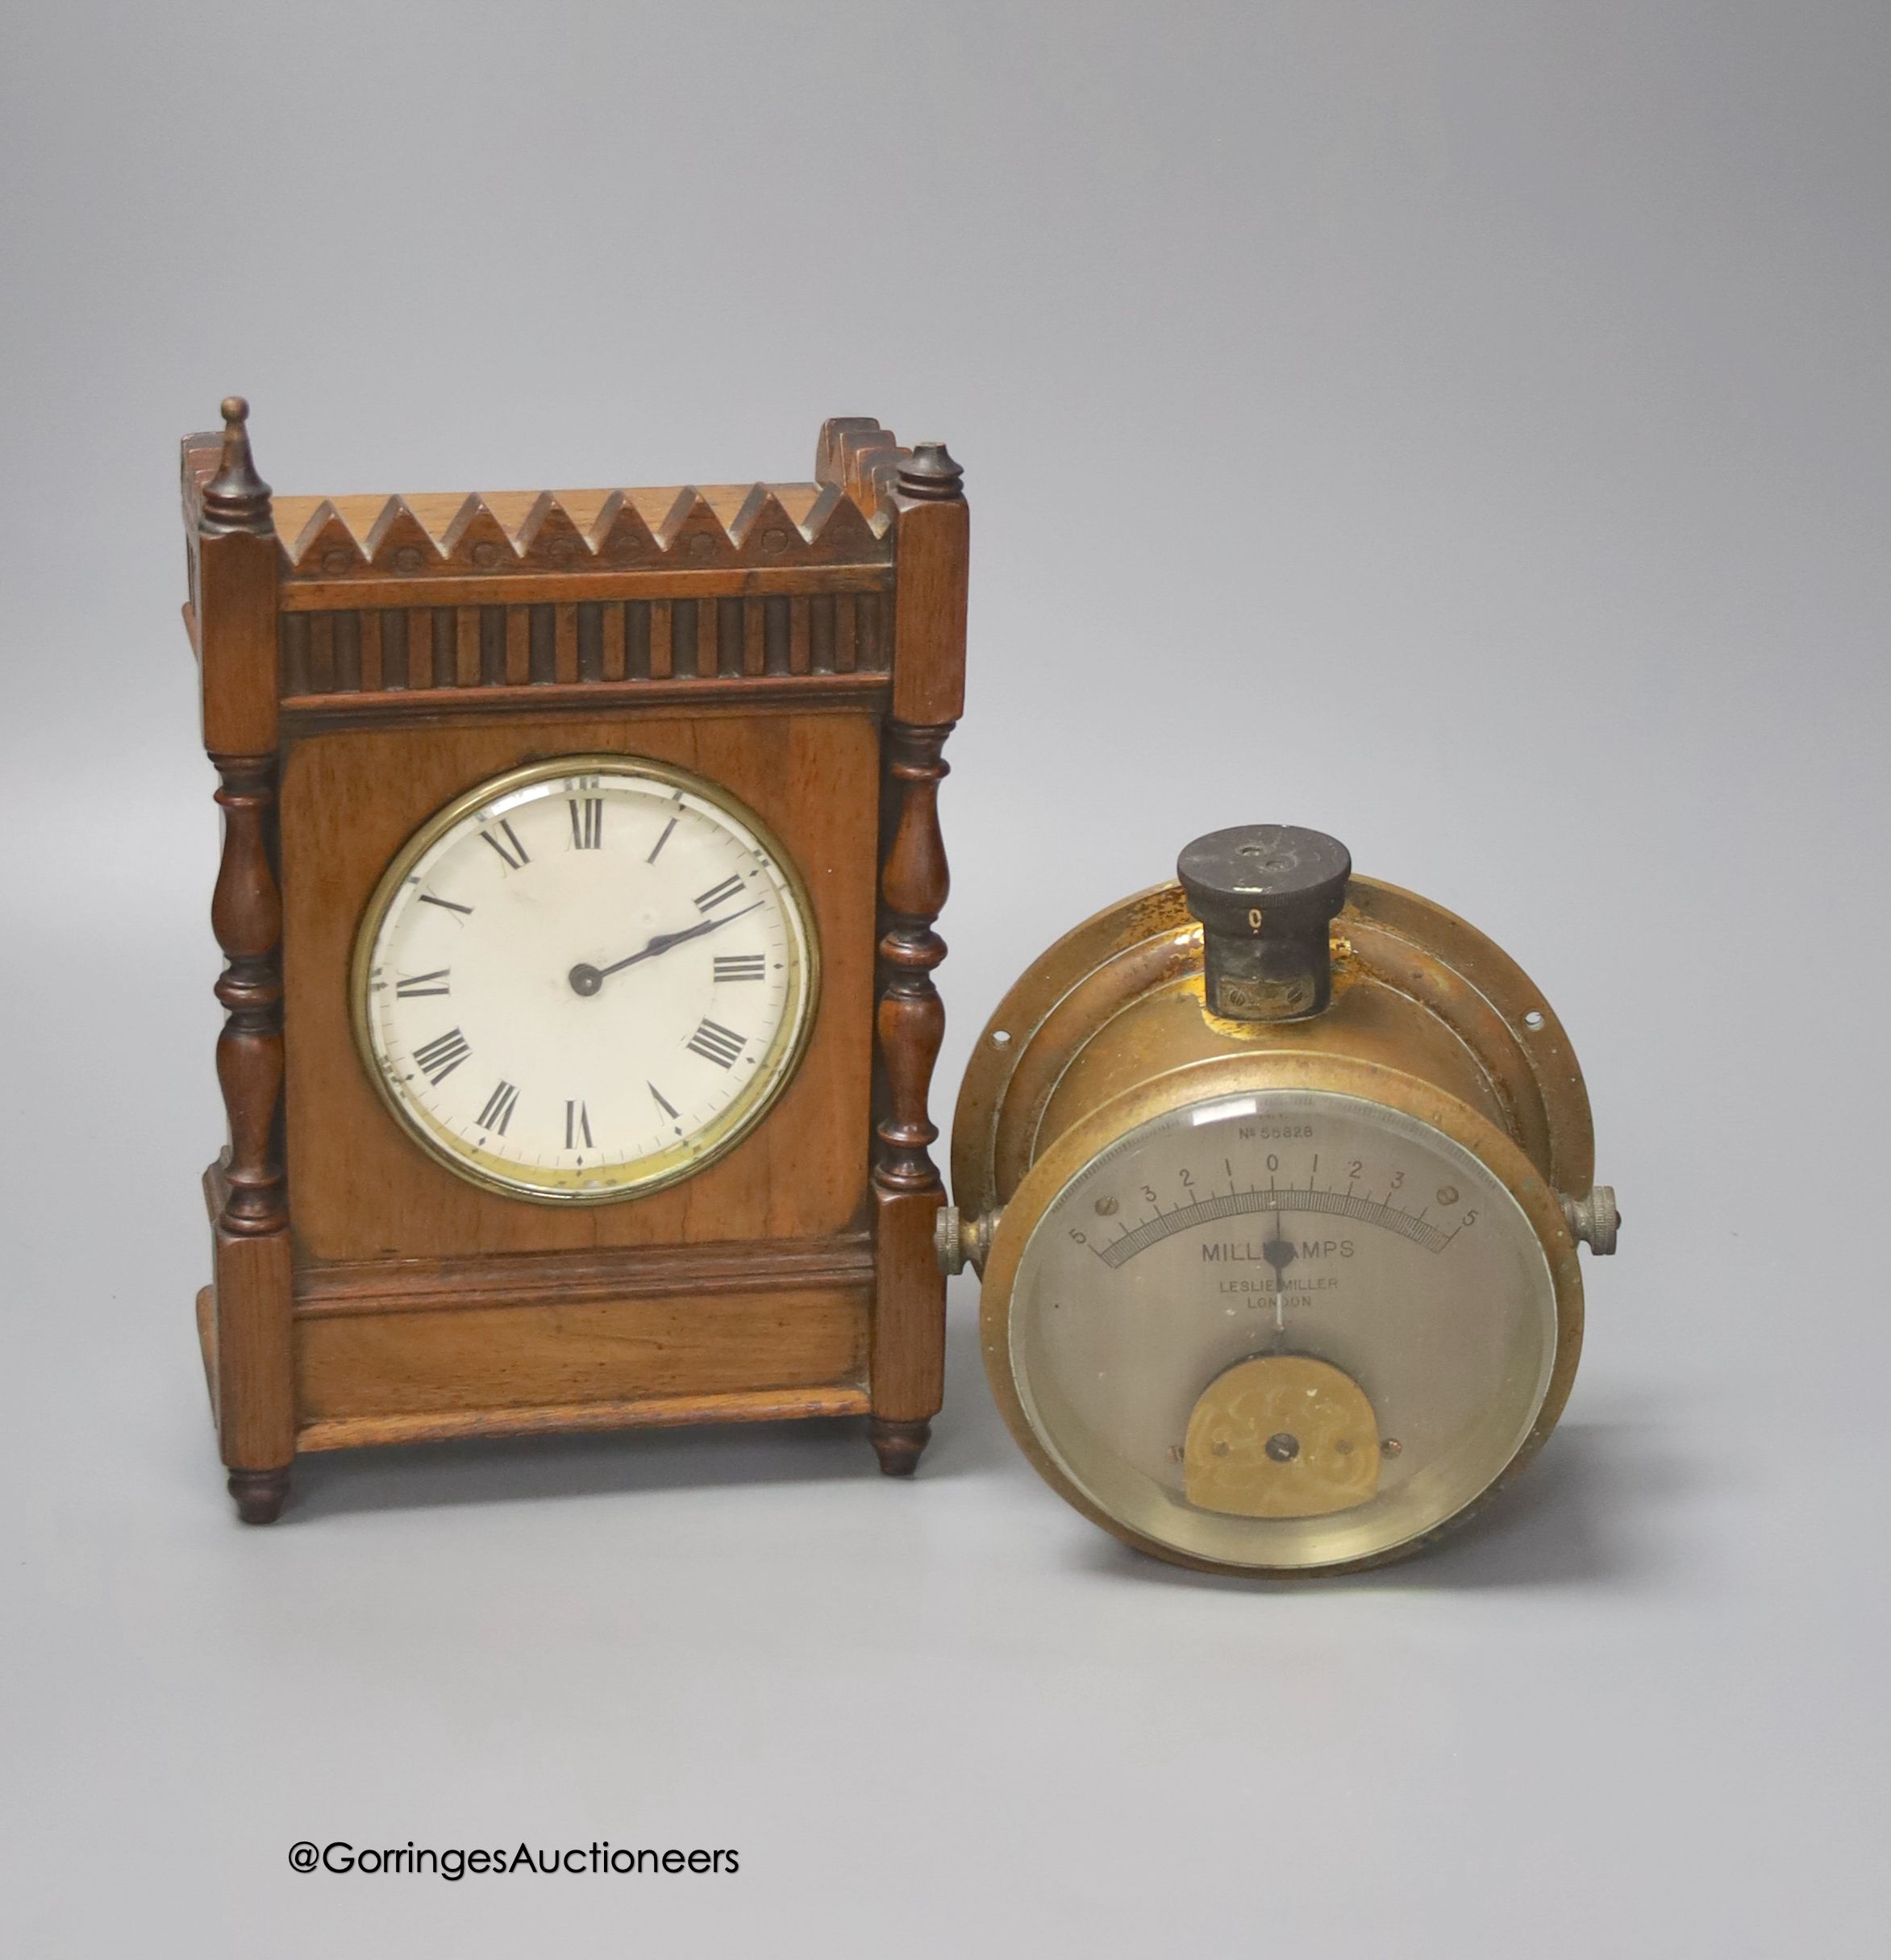 A French walnut cased mantel timepiece, with key, 23cm, and a brass cased Milli-Amps scale